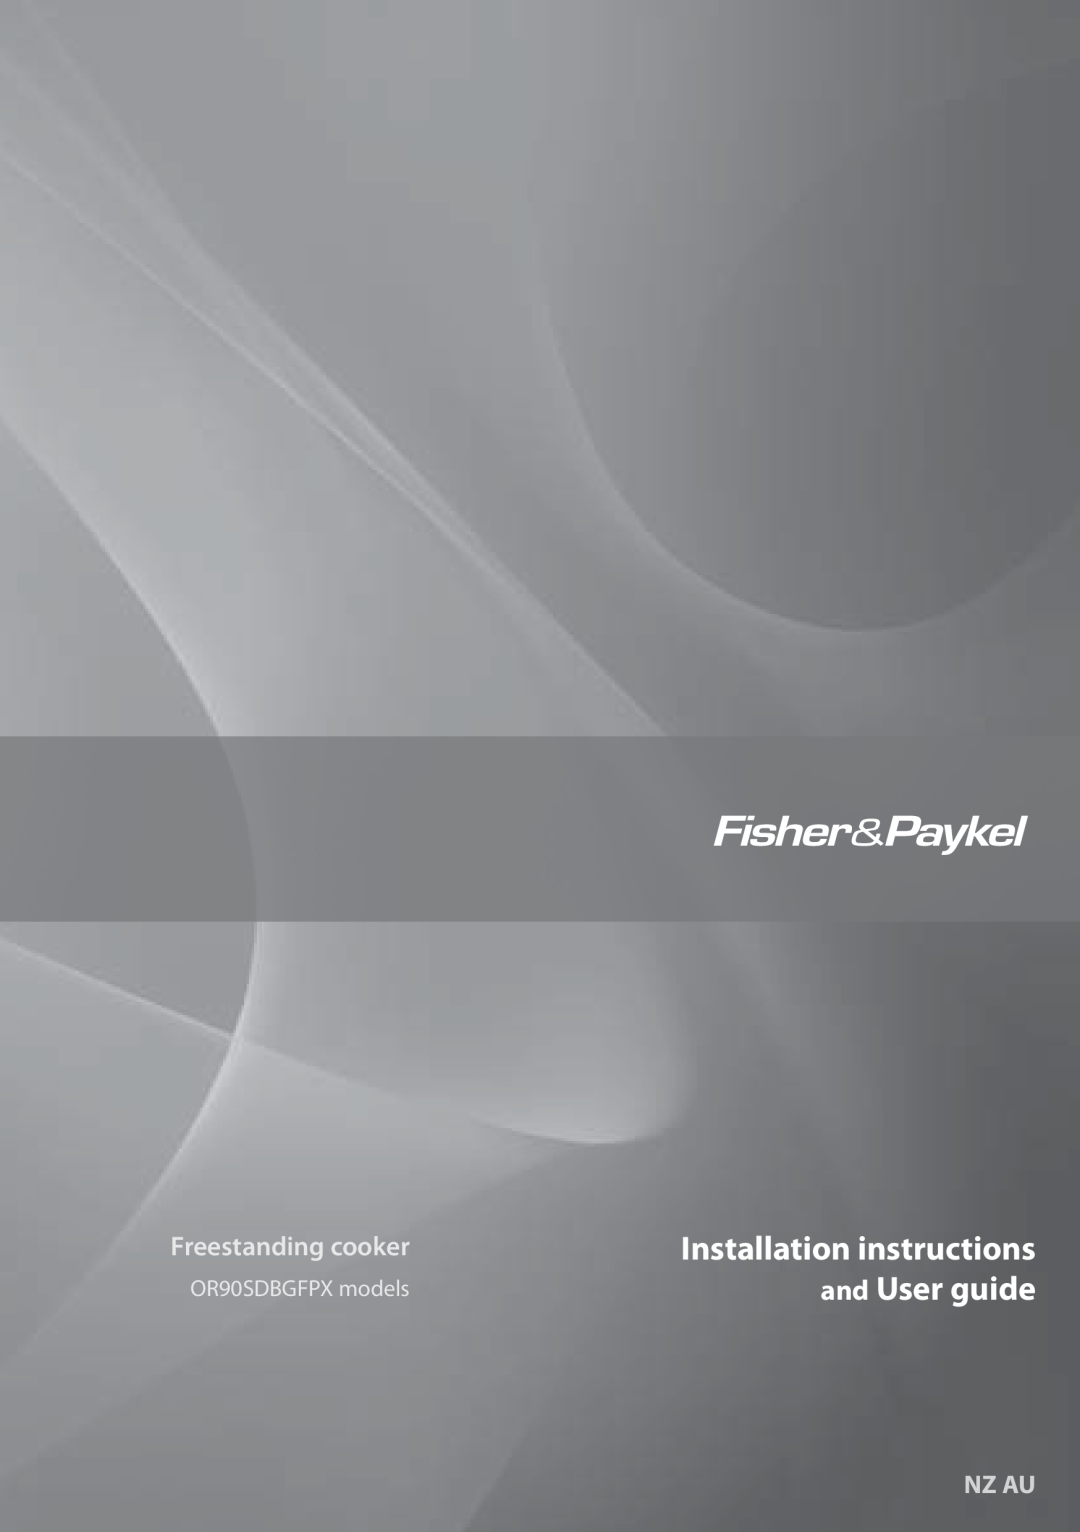 Fisher & Paykel installation instructions Installation instructions, and User guide, Nz Au, OR90SDBGFPX models 